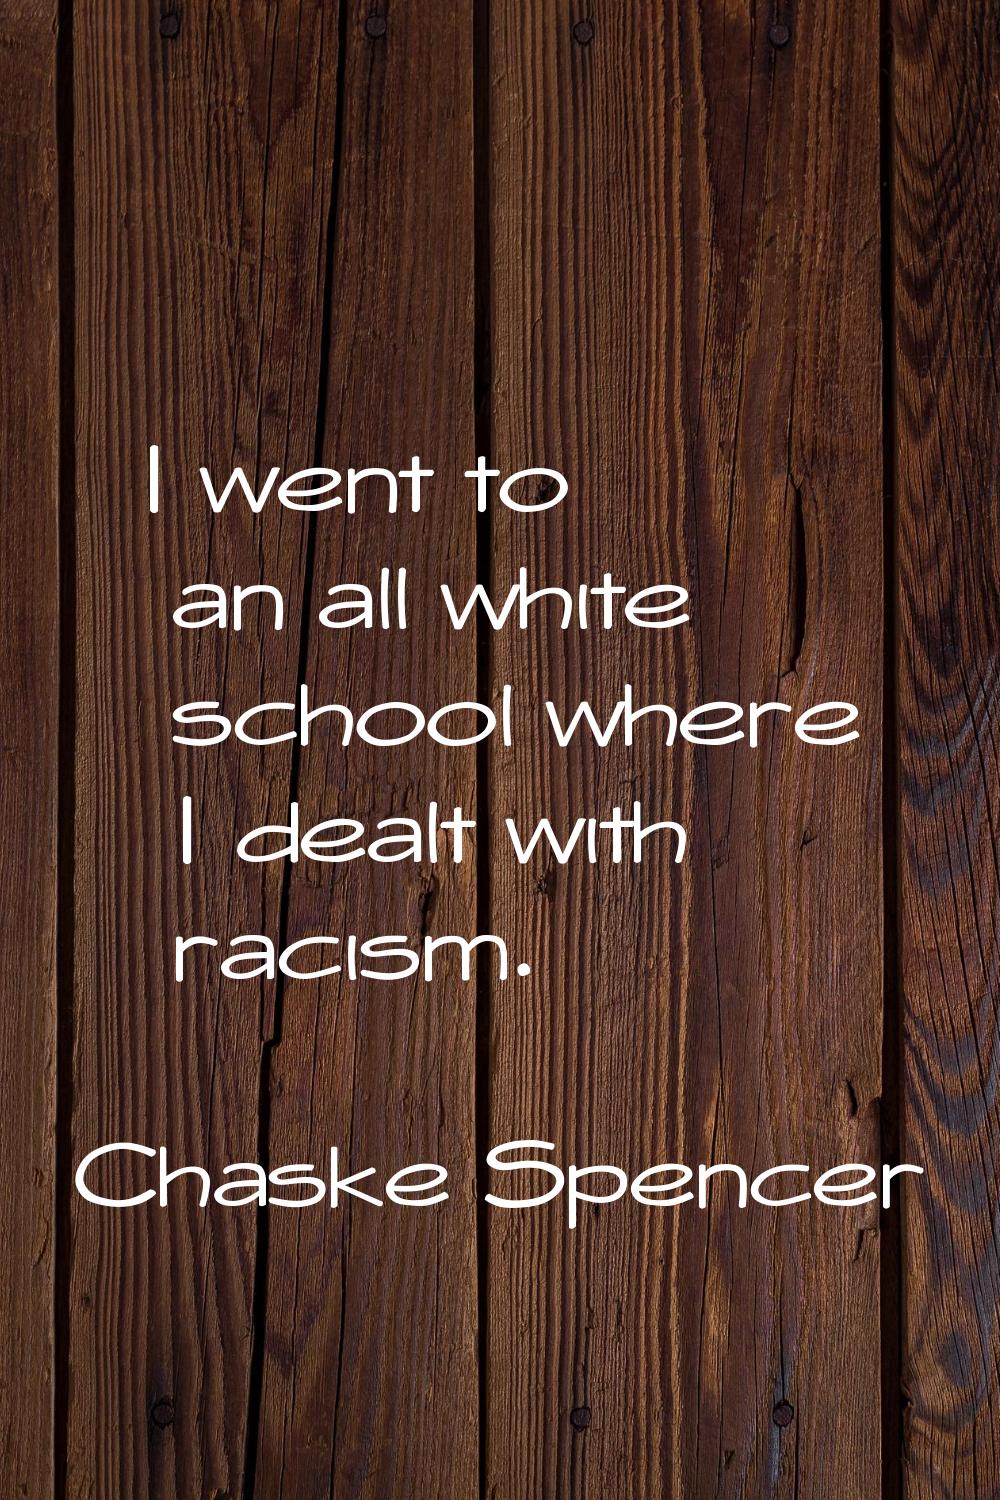 I went to an all white school where I dealt with racism.